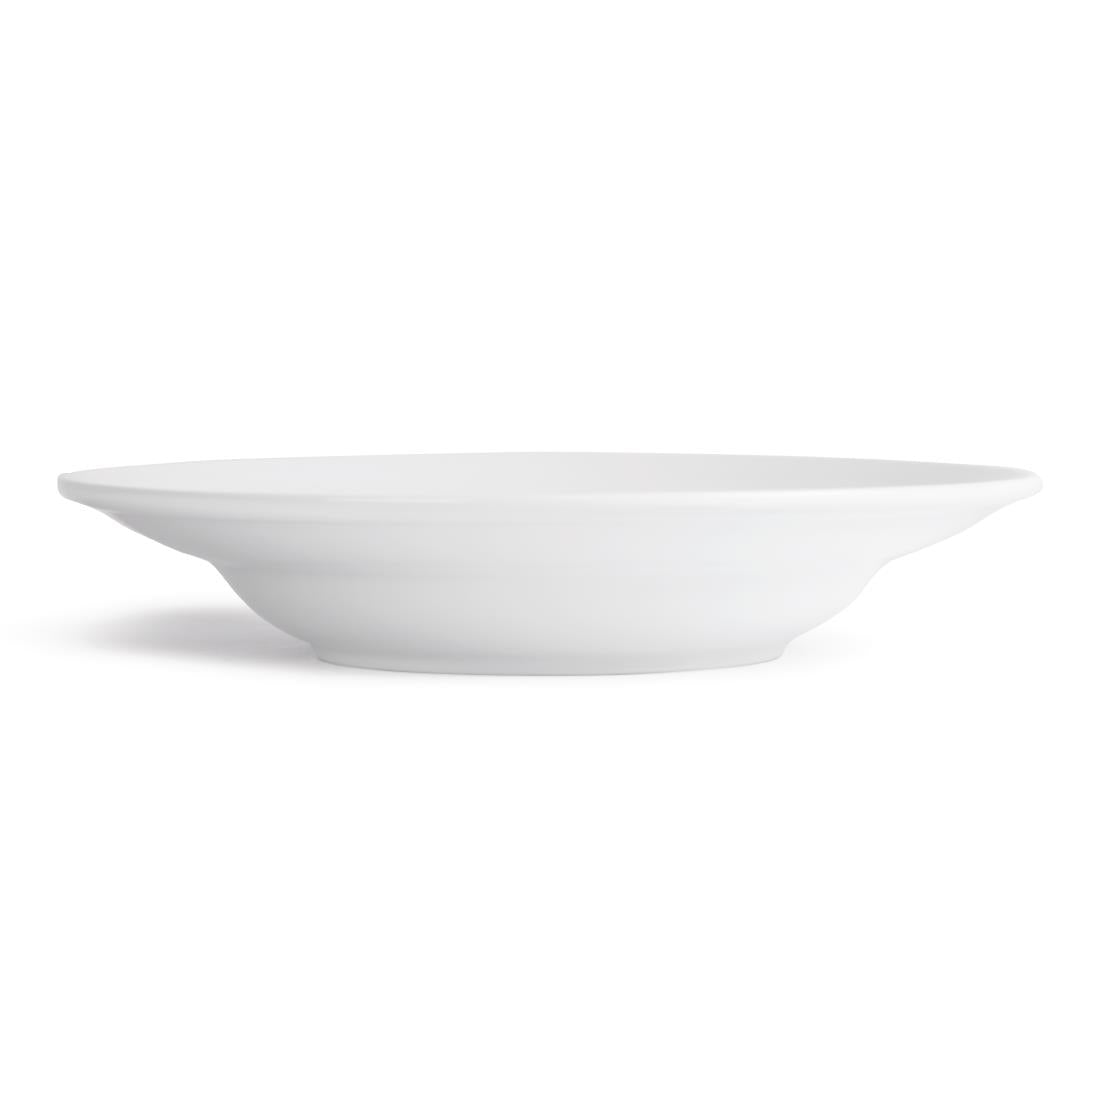 Royal Porcelain Classic White Pasta Plates 300mm (Pack of 12)